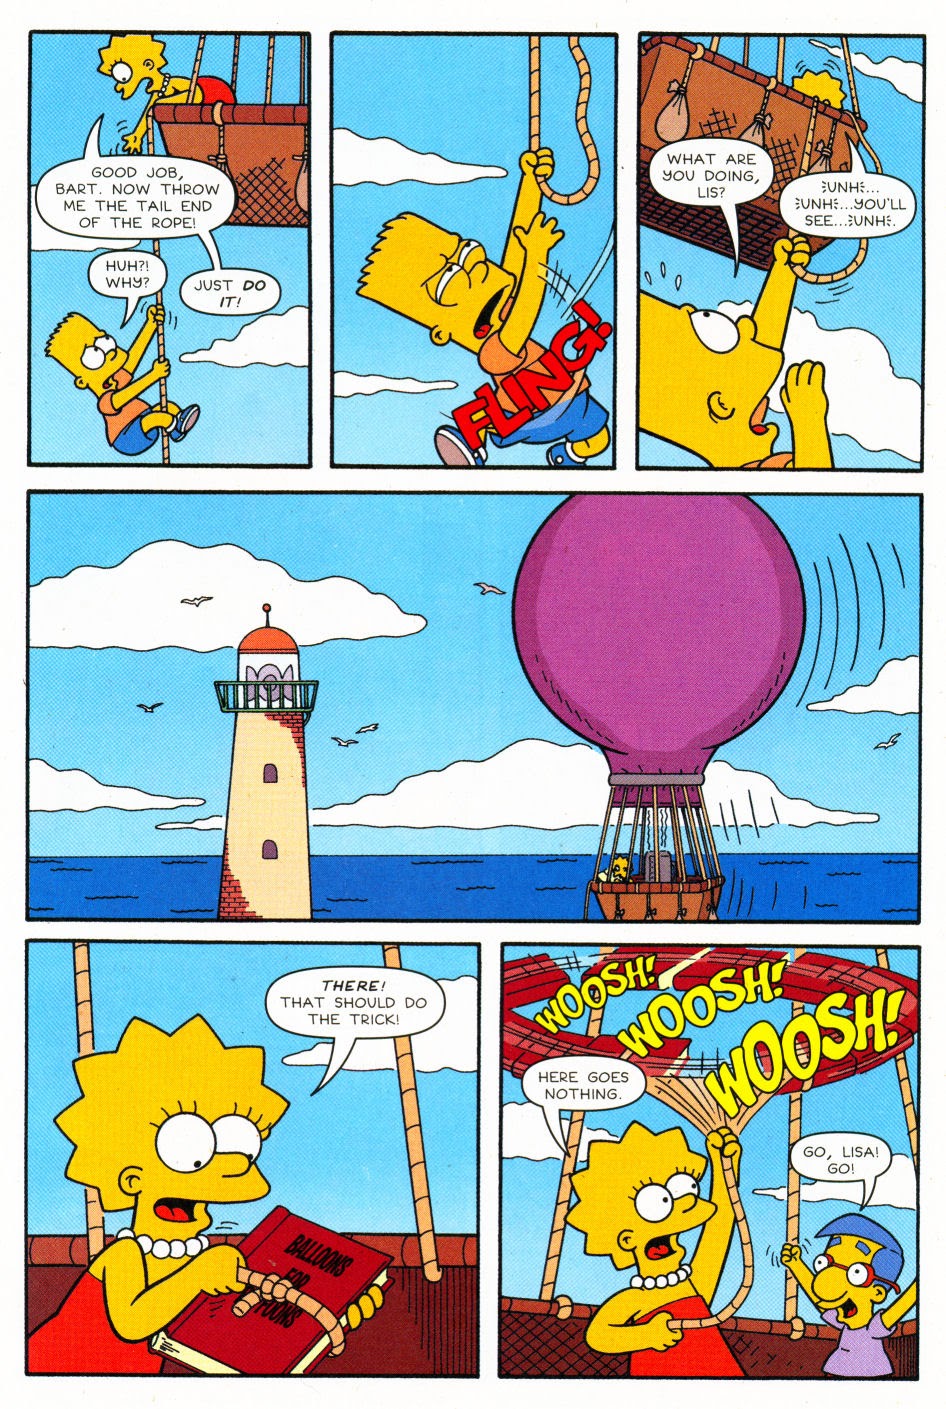 Read online Bart Simpson comic -  Issue #27 - 10